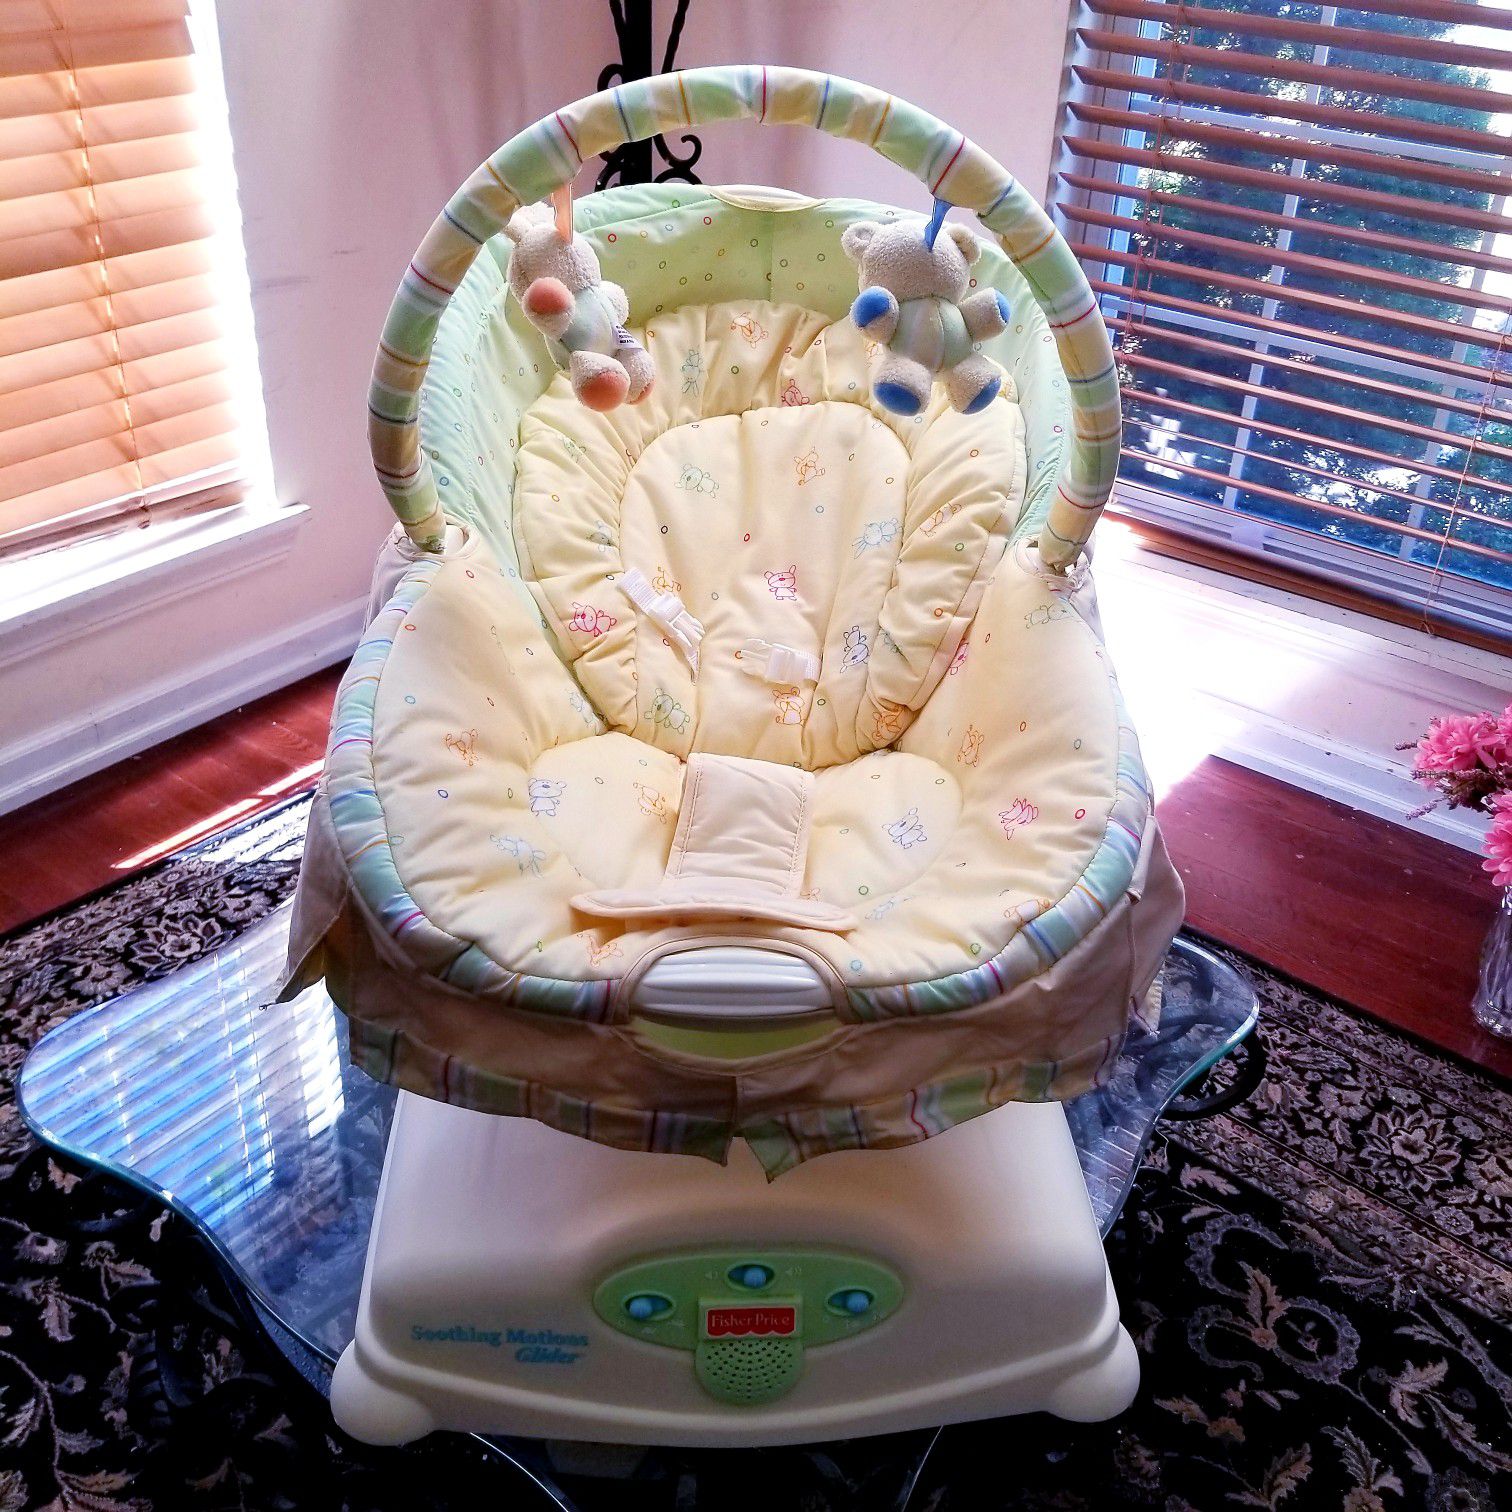 FISHER-PRICE Soothing Motion Glider